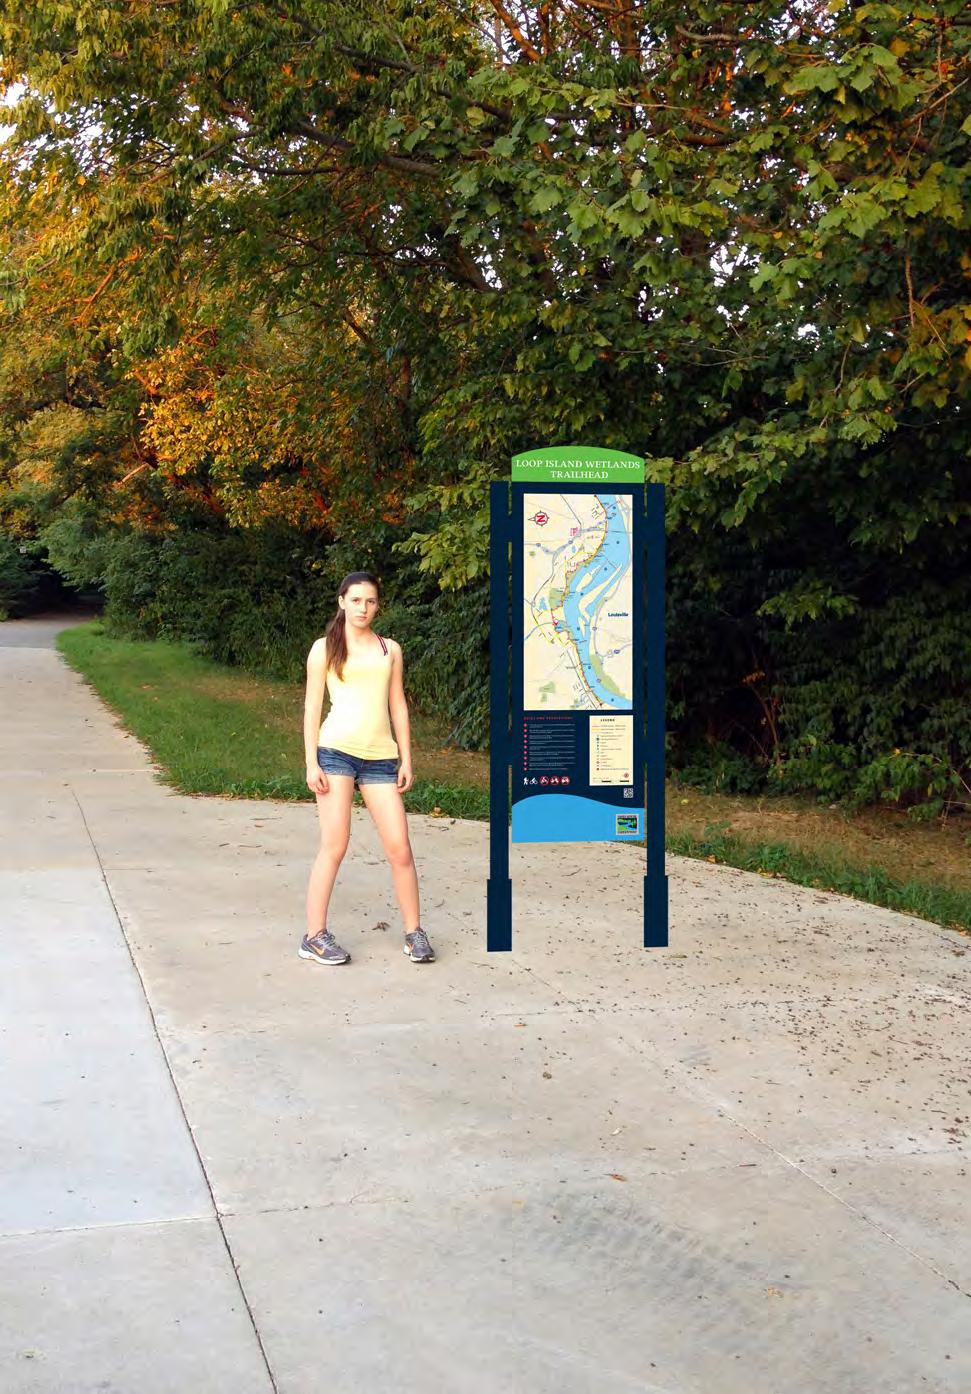 5 miles of the Ohio River Greenway Corridor and to key destinations.